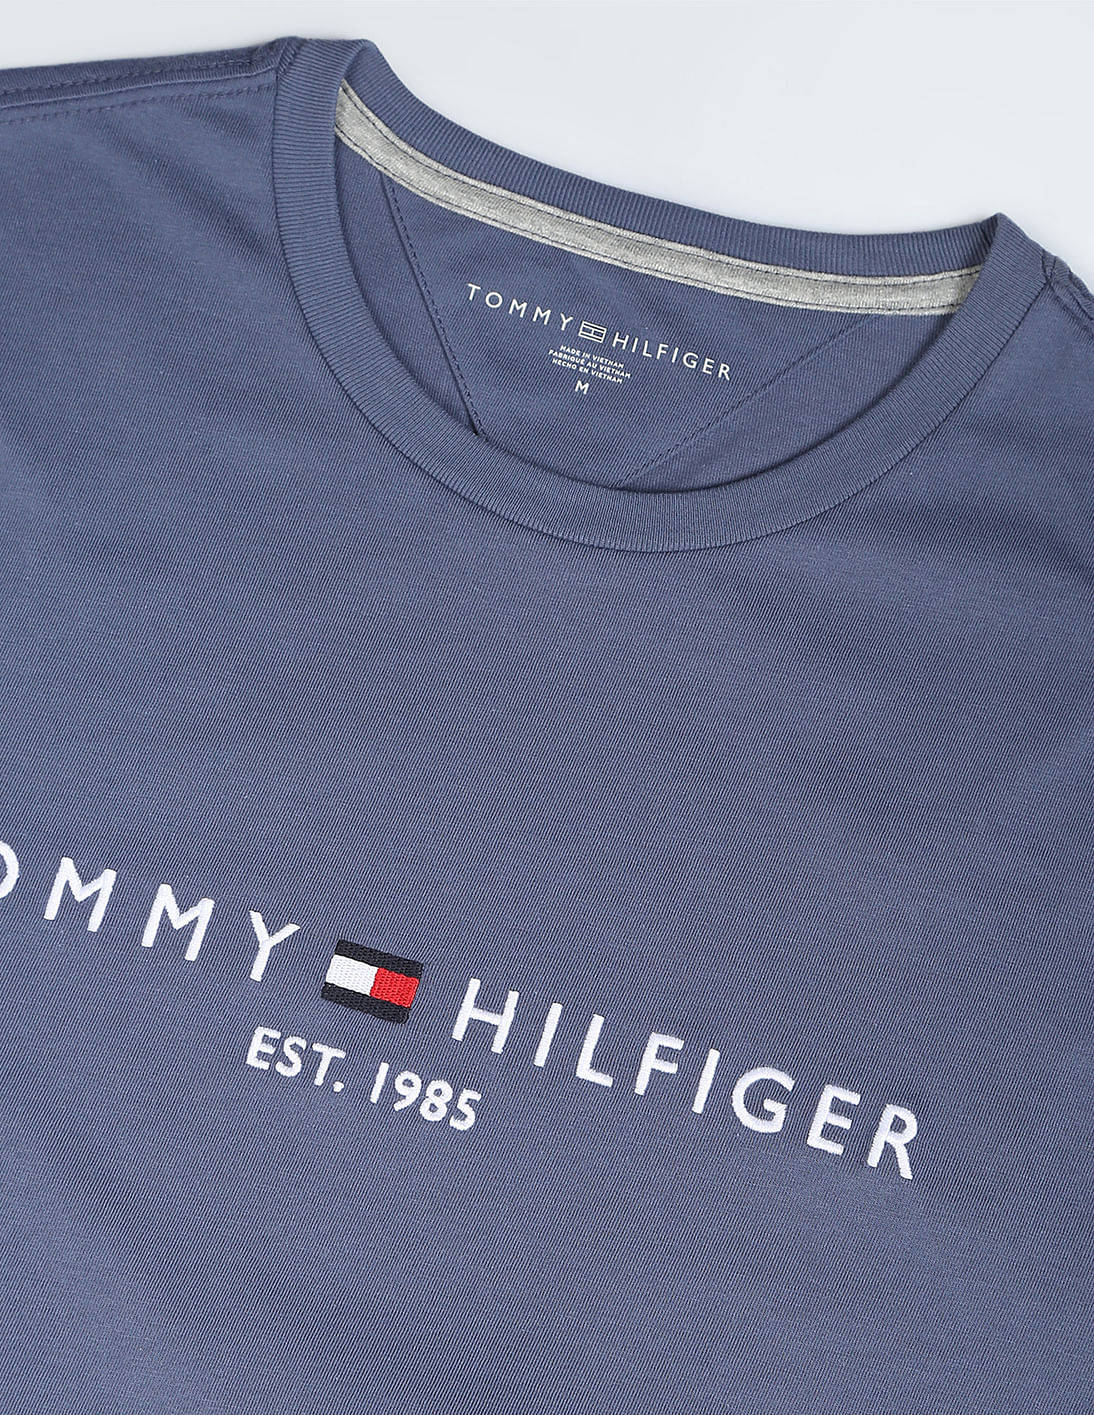 Buy Tommy Hilfiger Embroidered Logo Cotton T-Shirt 